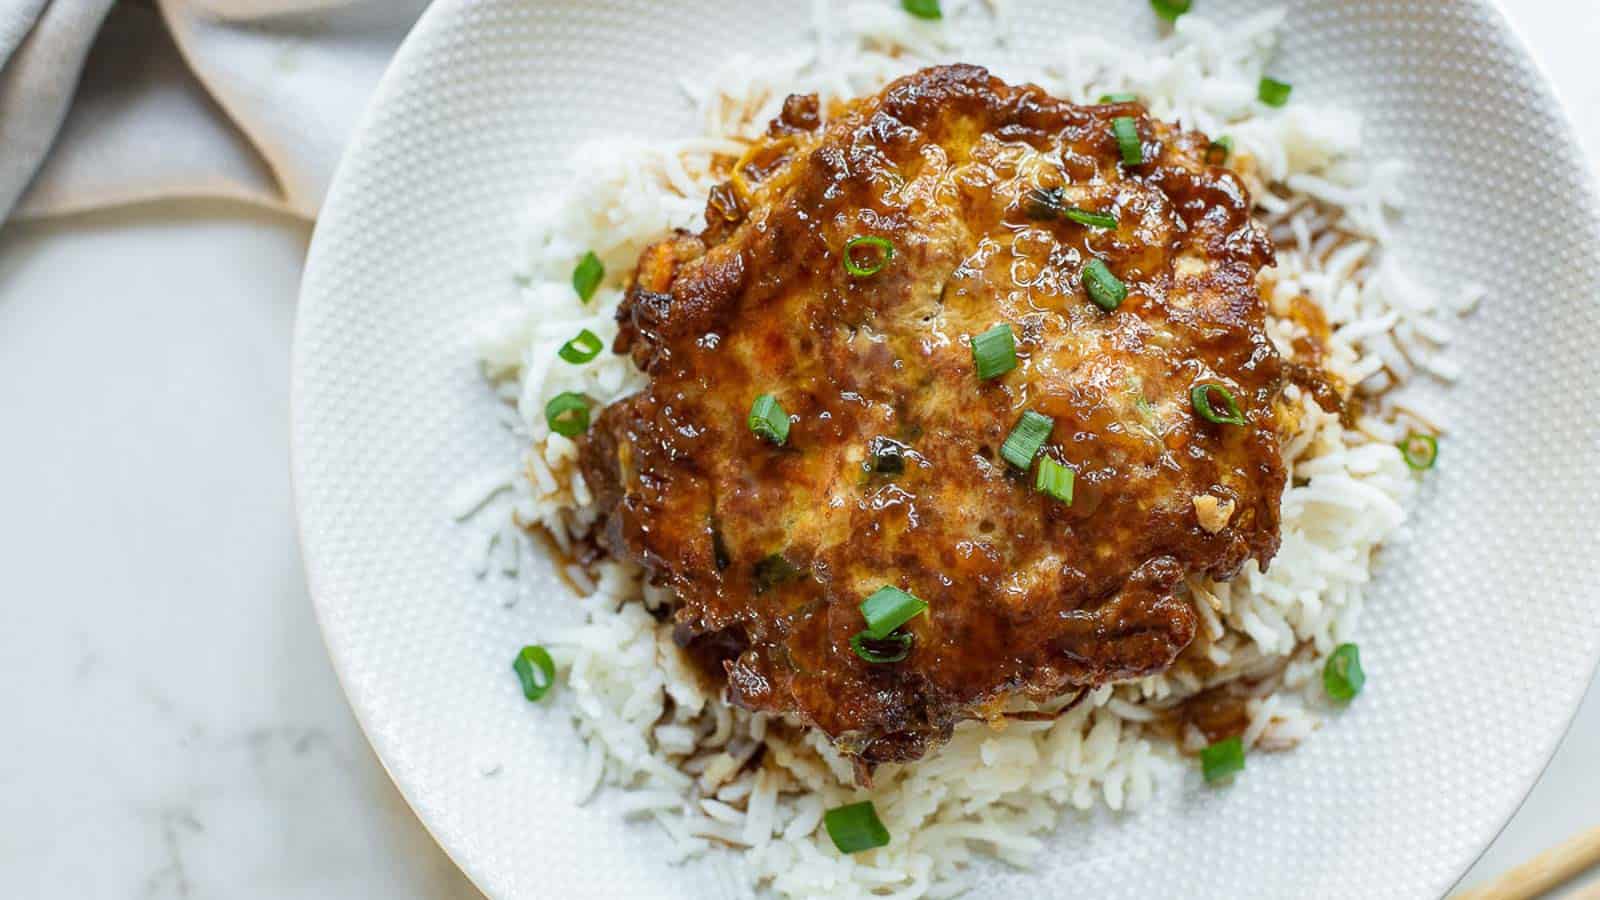 Chicken egg foo young on top of rice on a white plate.